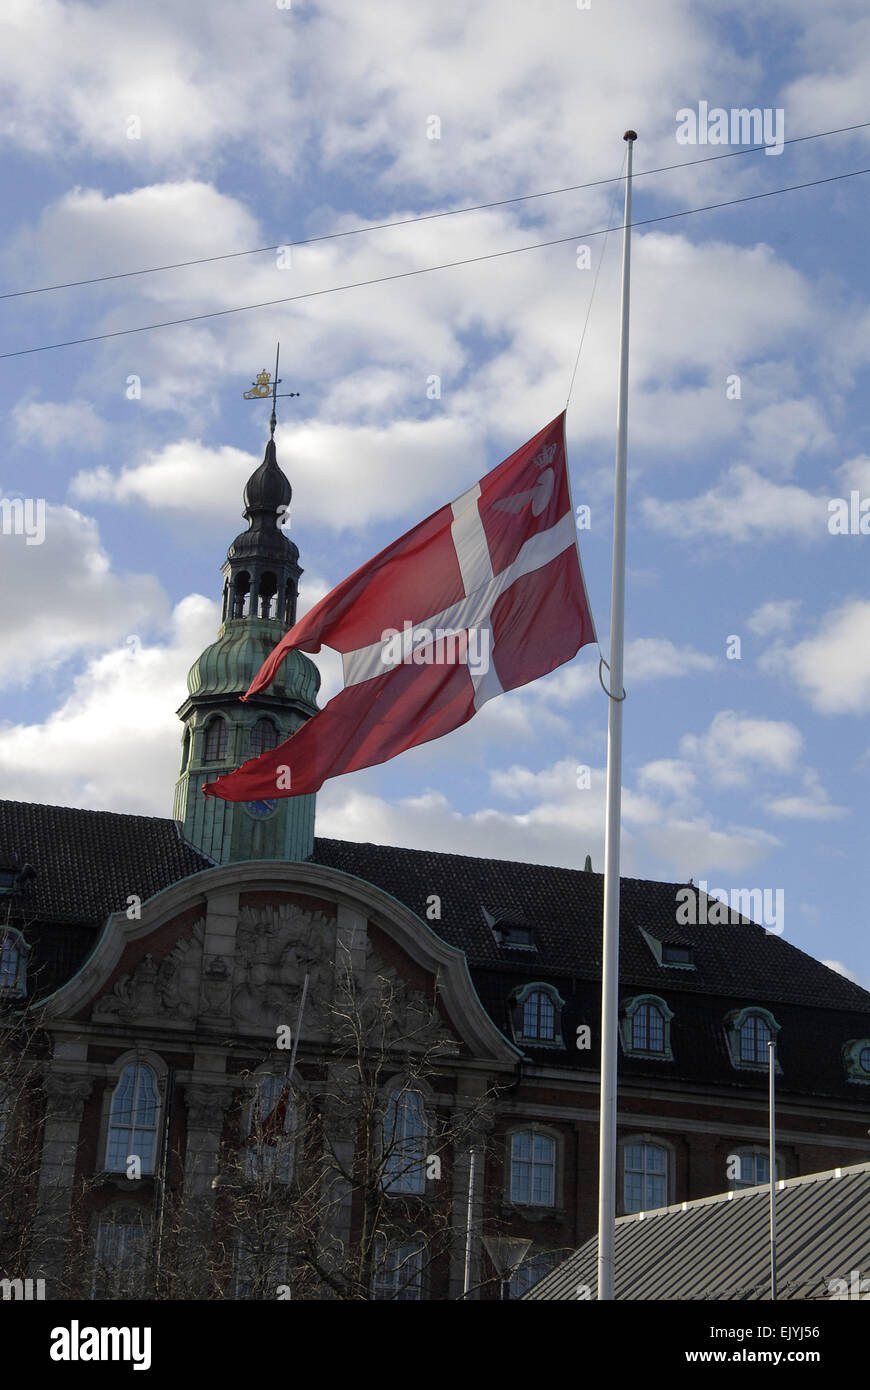 Francis Dean. 03rd Apr, 2015. Danish flag (Dannebrog) at half mast/half staff at all official buildings like Parliament, Copenhagen City Hall and all ministries and non public buildings like banks and other non official buildings to mark Good Friday. Danes take very seriously all religious holidays. Denmark is a secular state but the Danish Lutheran church is official state church and Queen Margrethe II of Denmark is head of church  therefore Danish flag is at half mast because of Good Friday. Credit:  Francis Dean/Alamy Live News Stock Photo